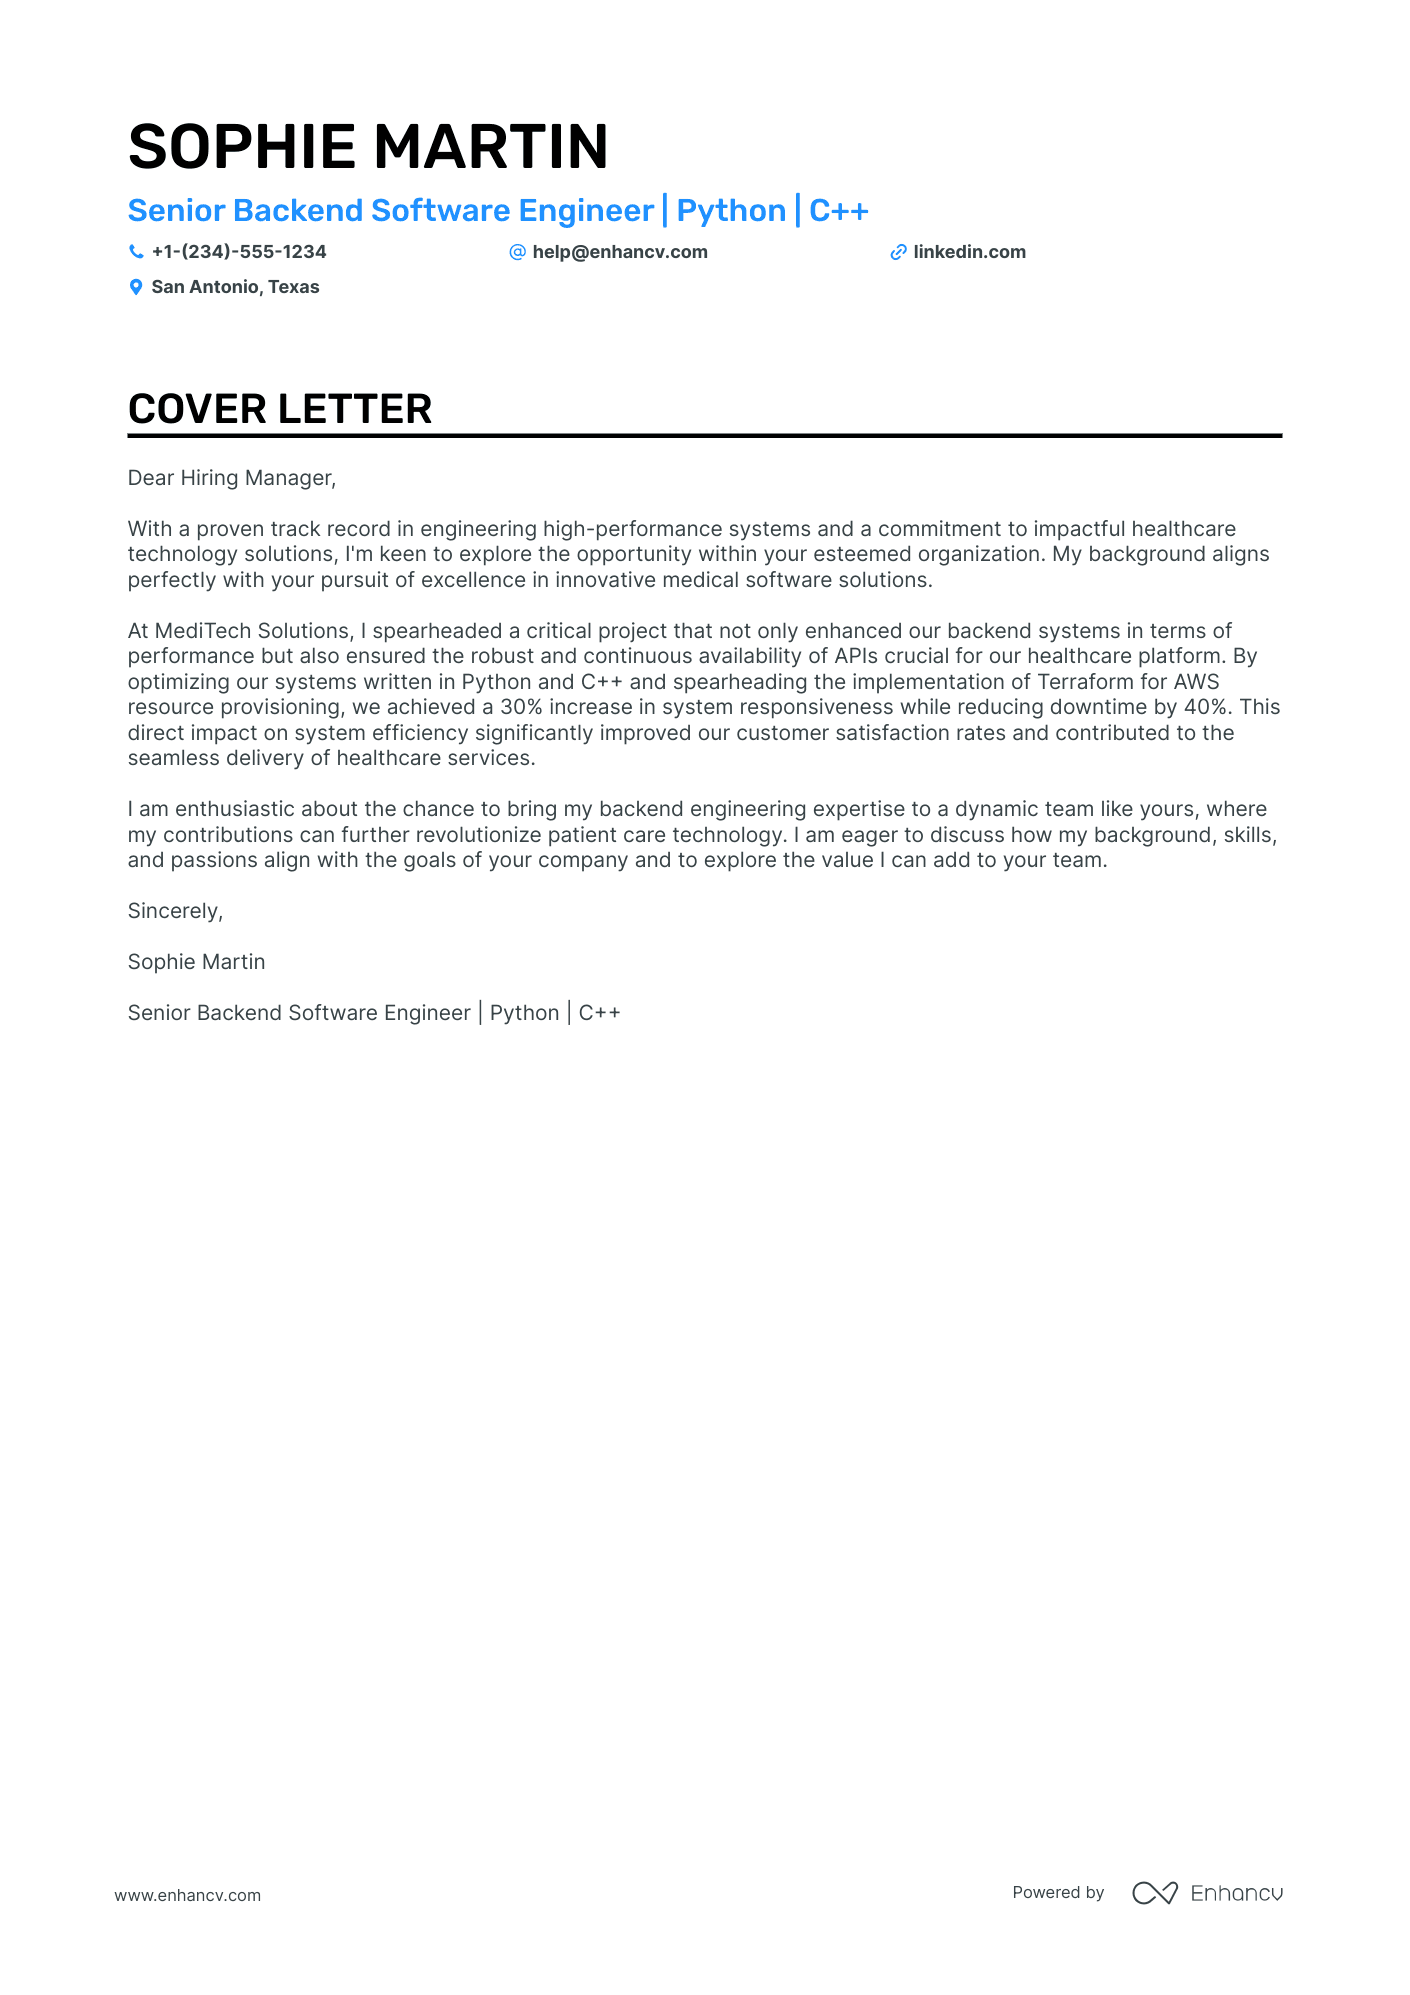 Backend Engineer cover letter